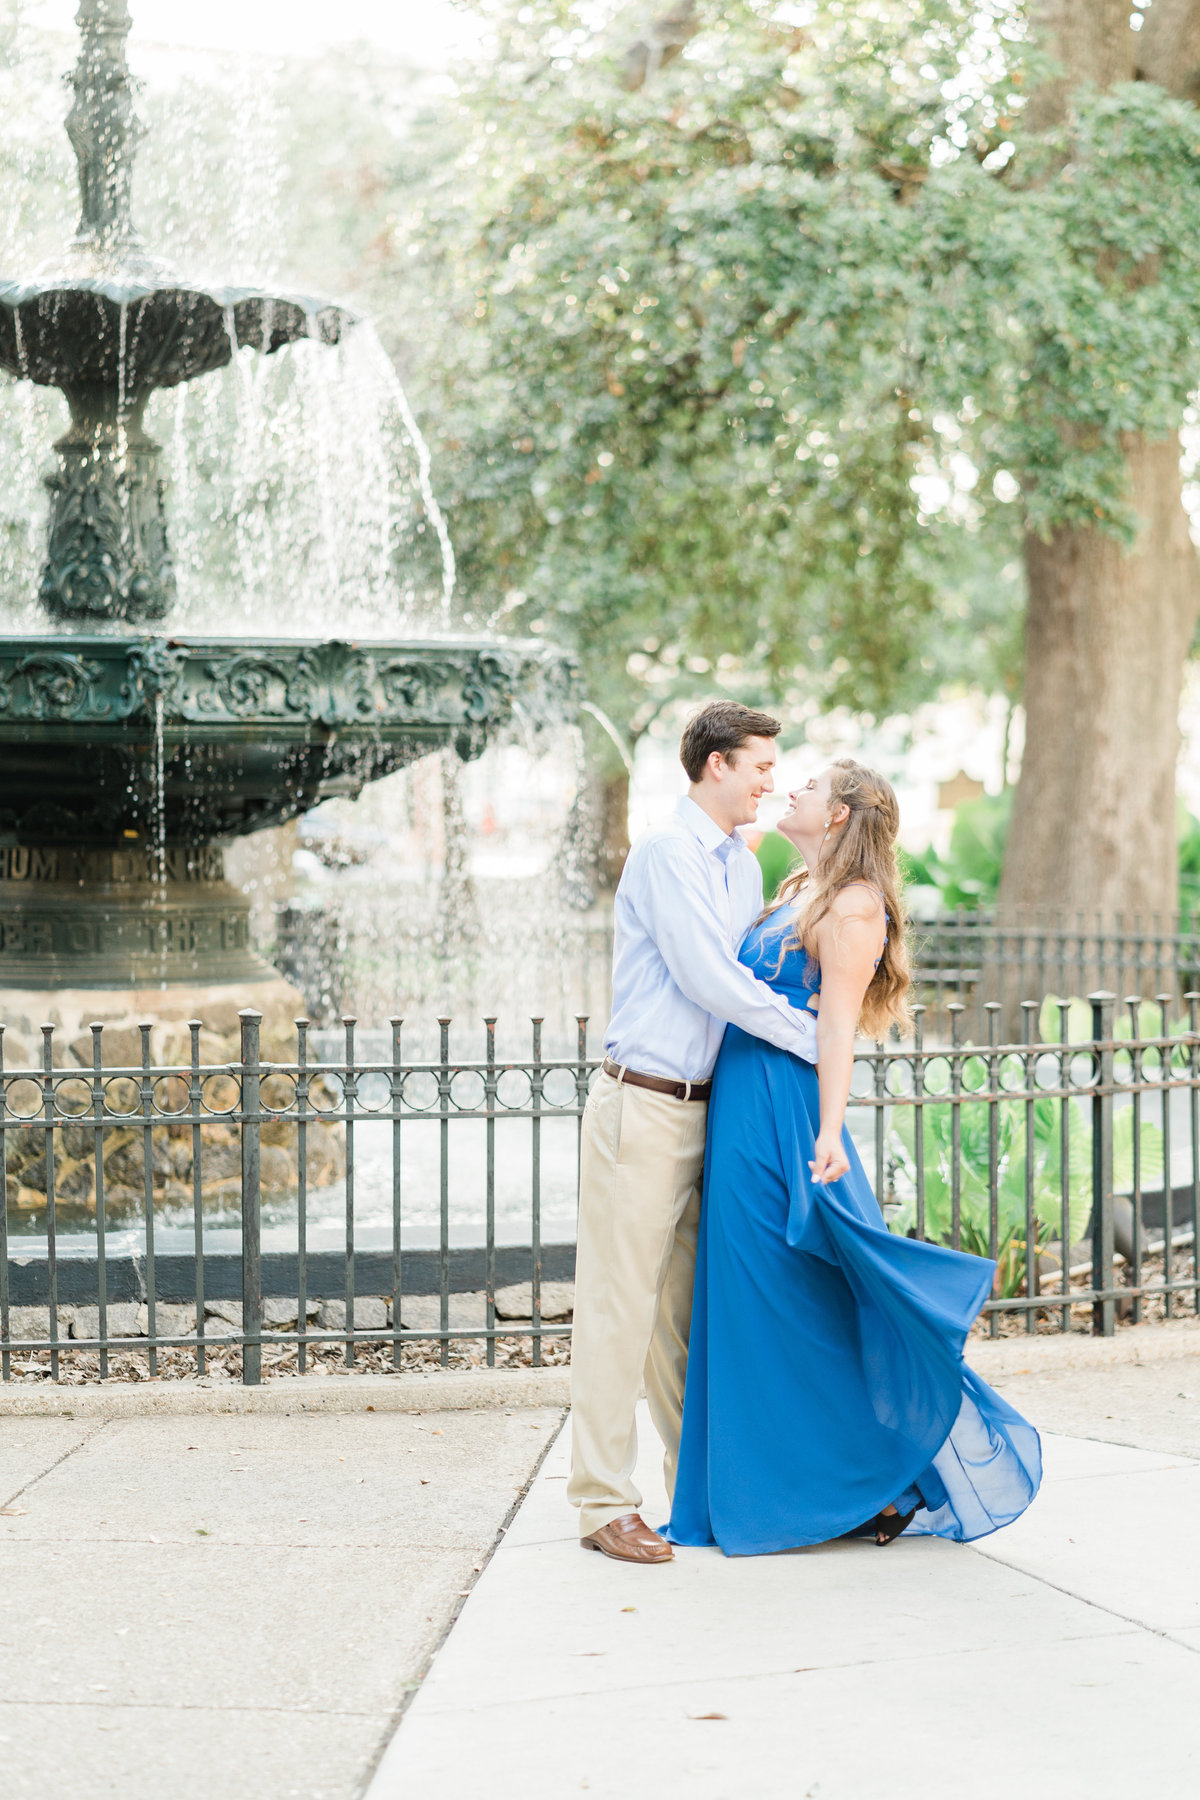 Engagement photoshoot at a park in Alabama